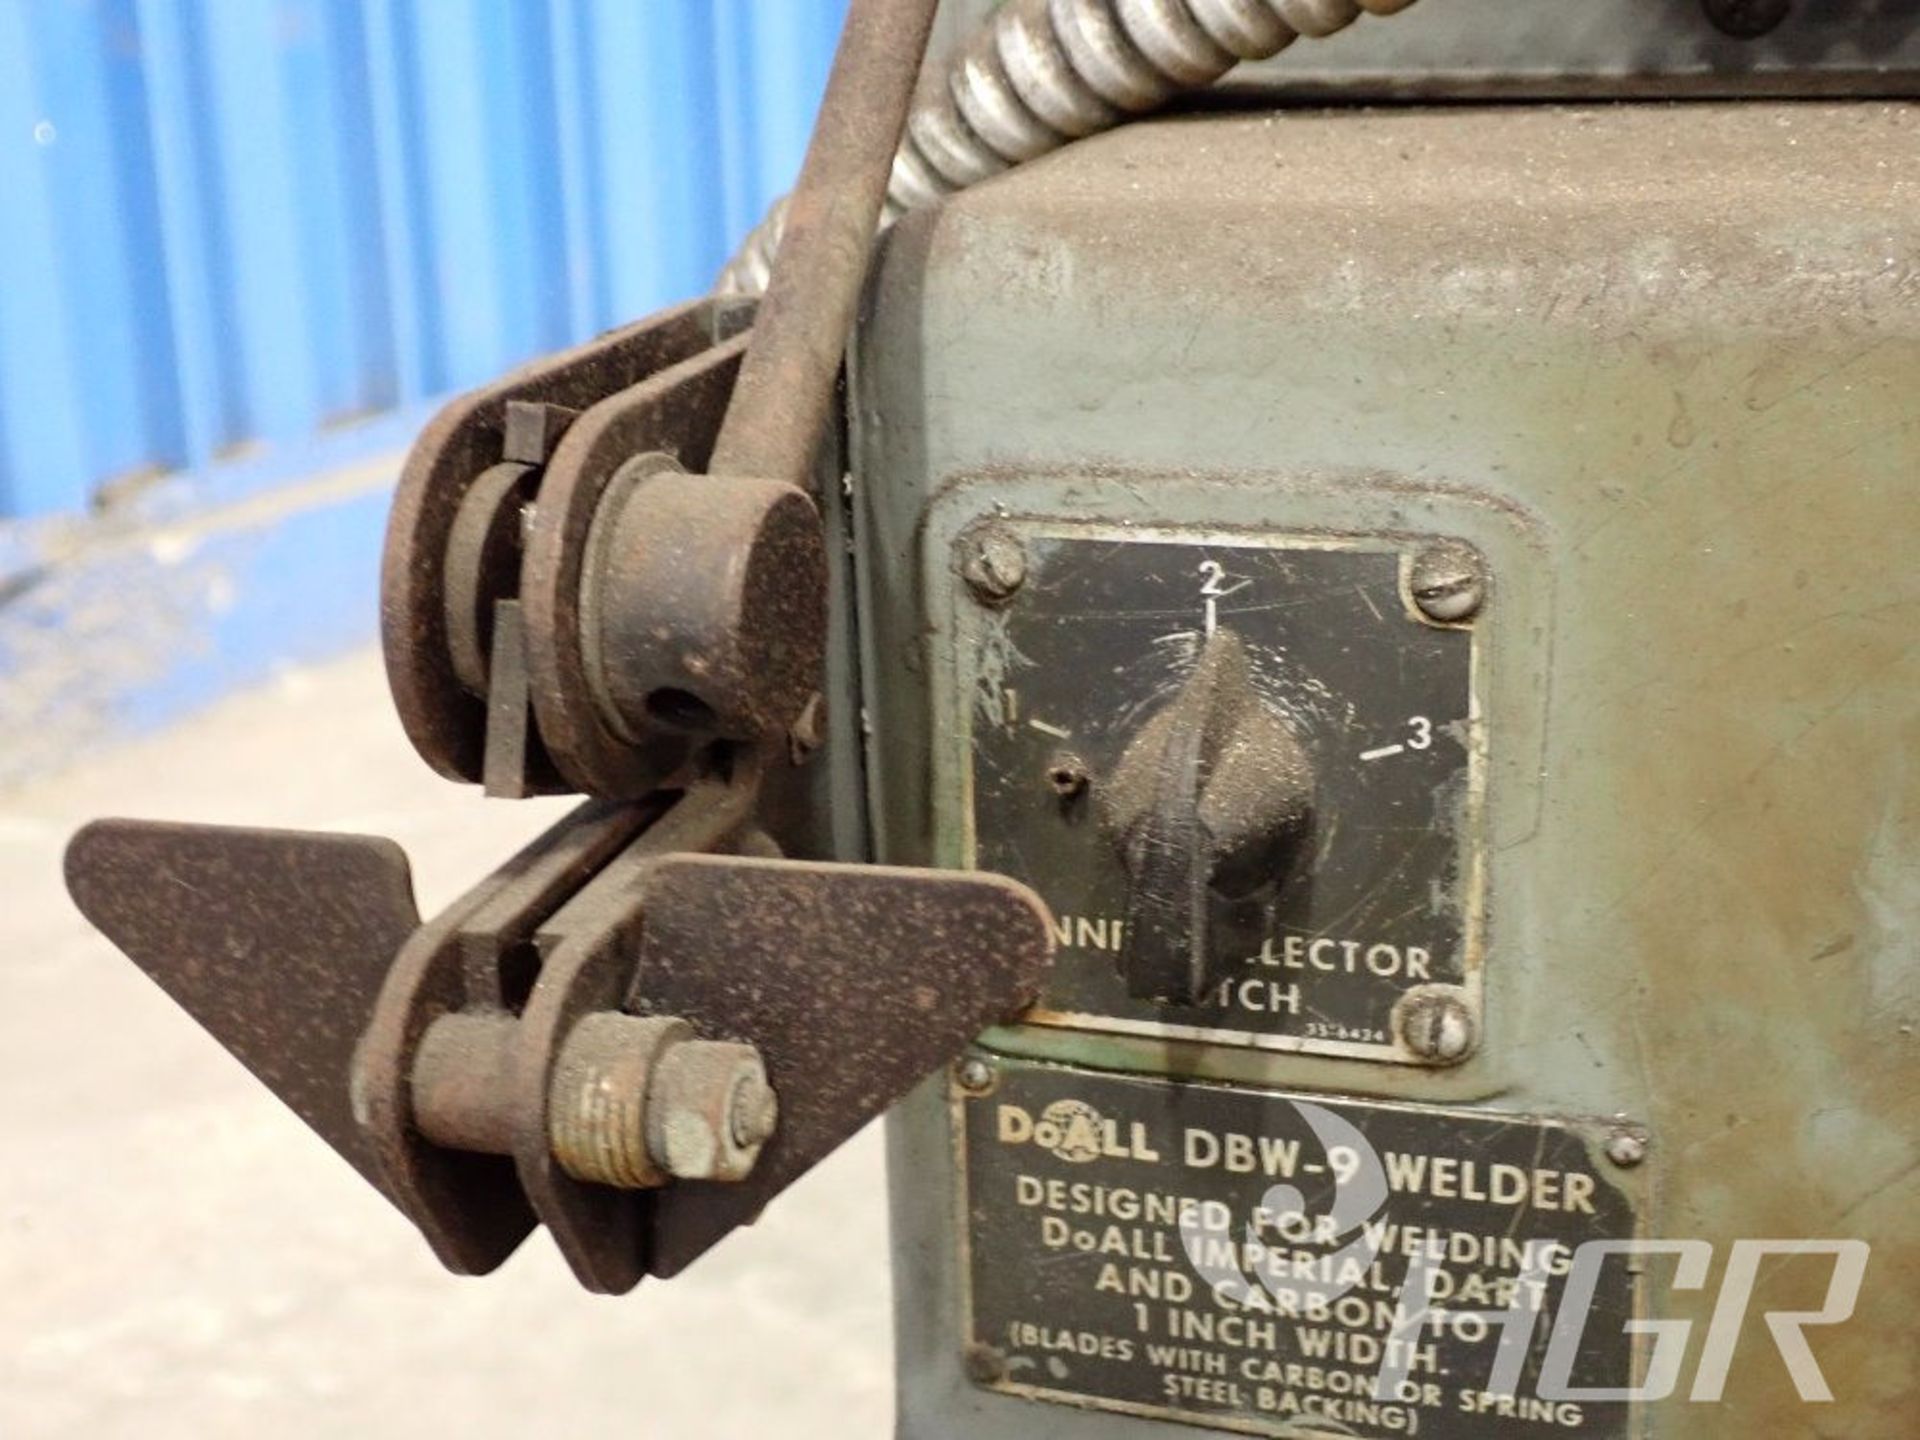 DOALL BANDSAW, Model 3612-3. , Date: n/a; s/n 153-691067, Approx. Capacity: 16", Power: n/a, - Image 22 of 29